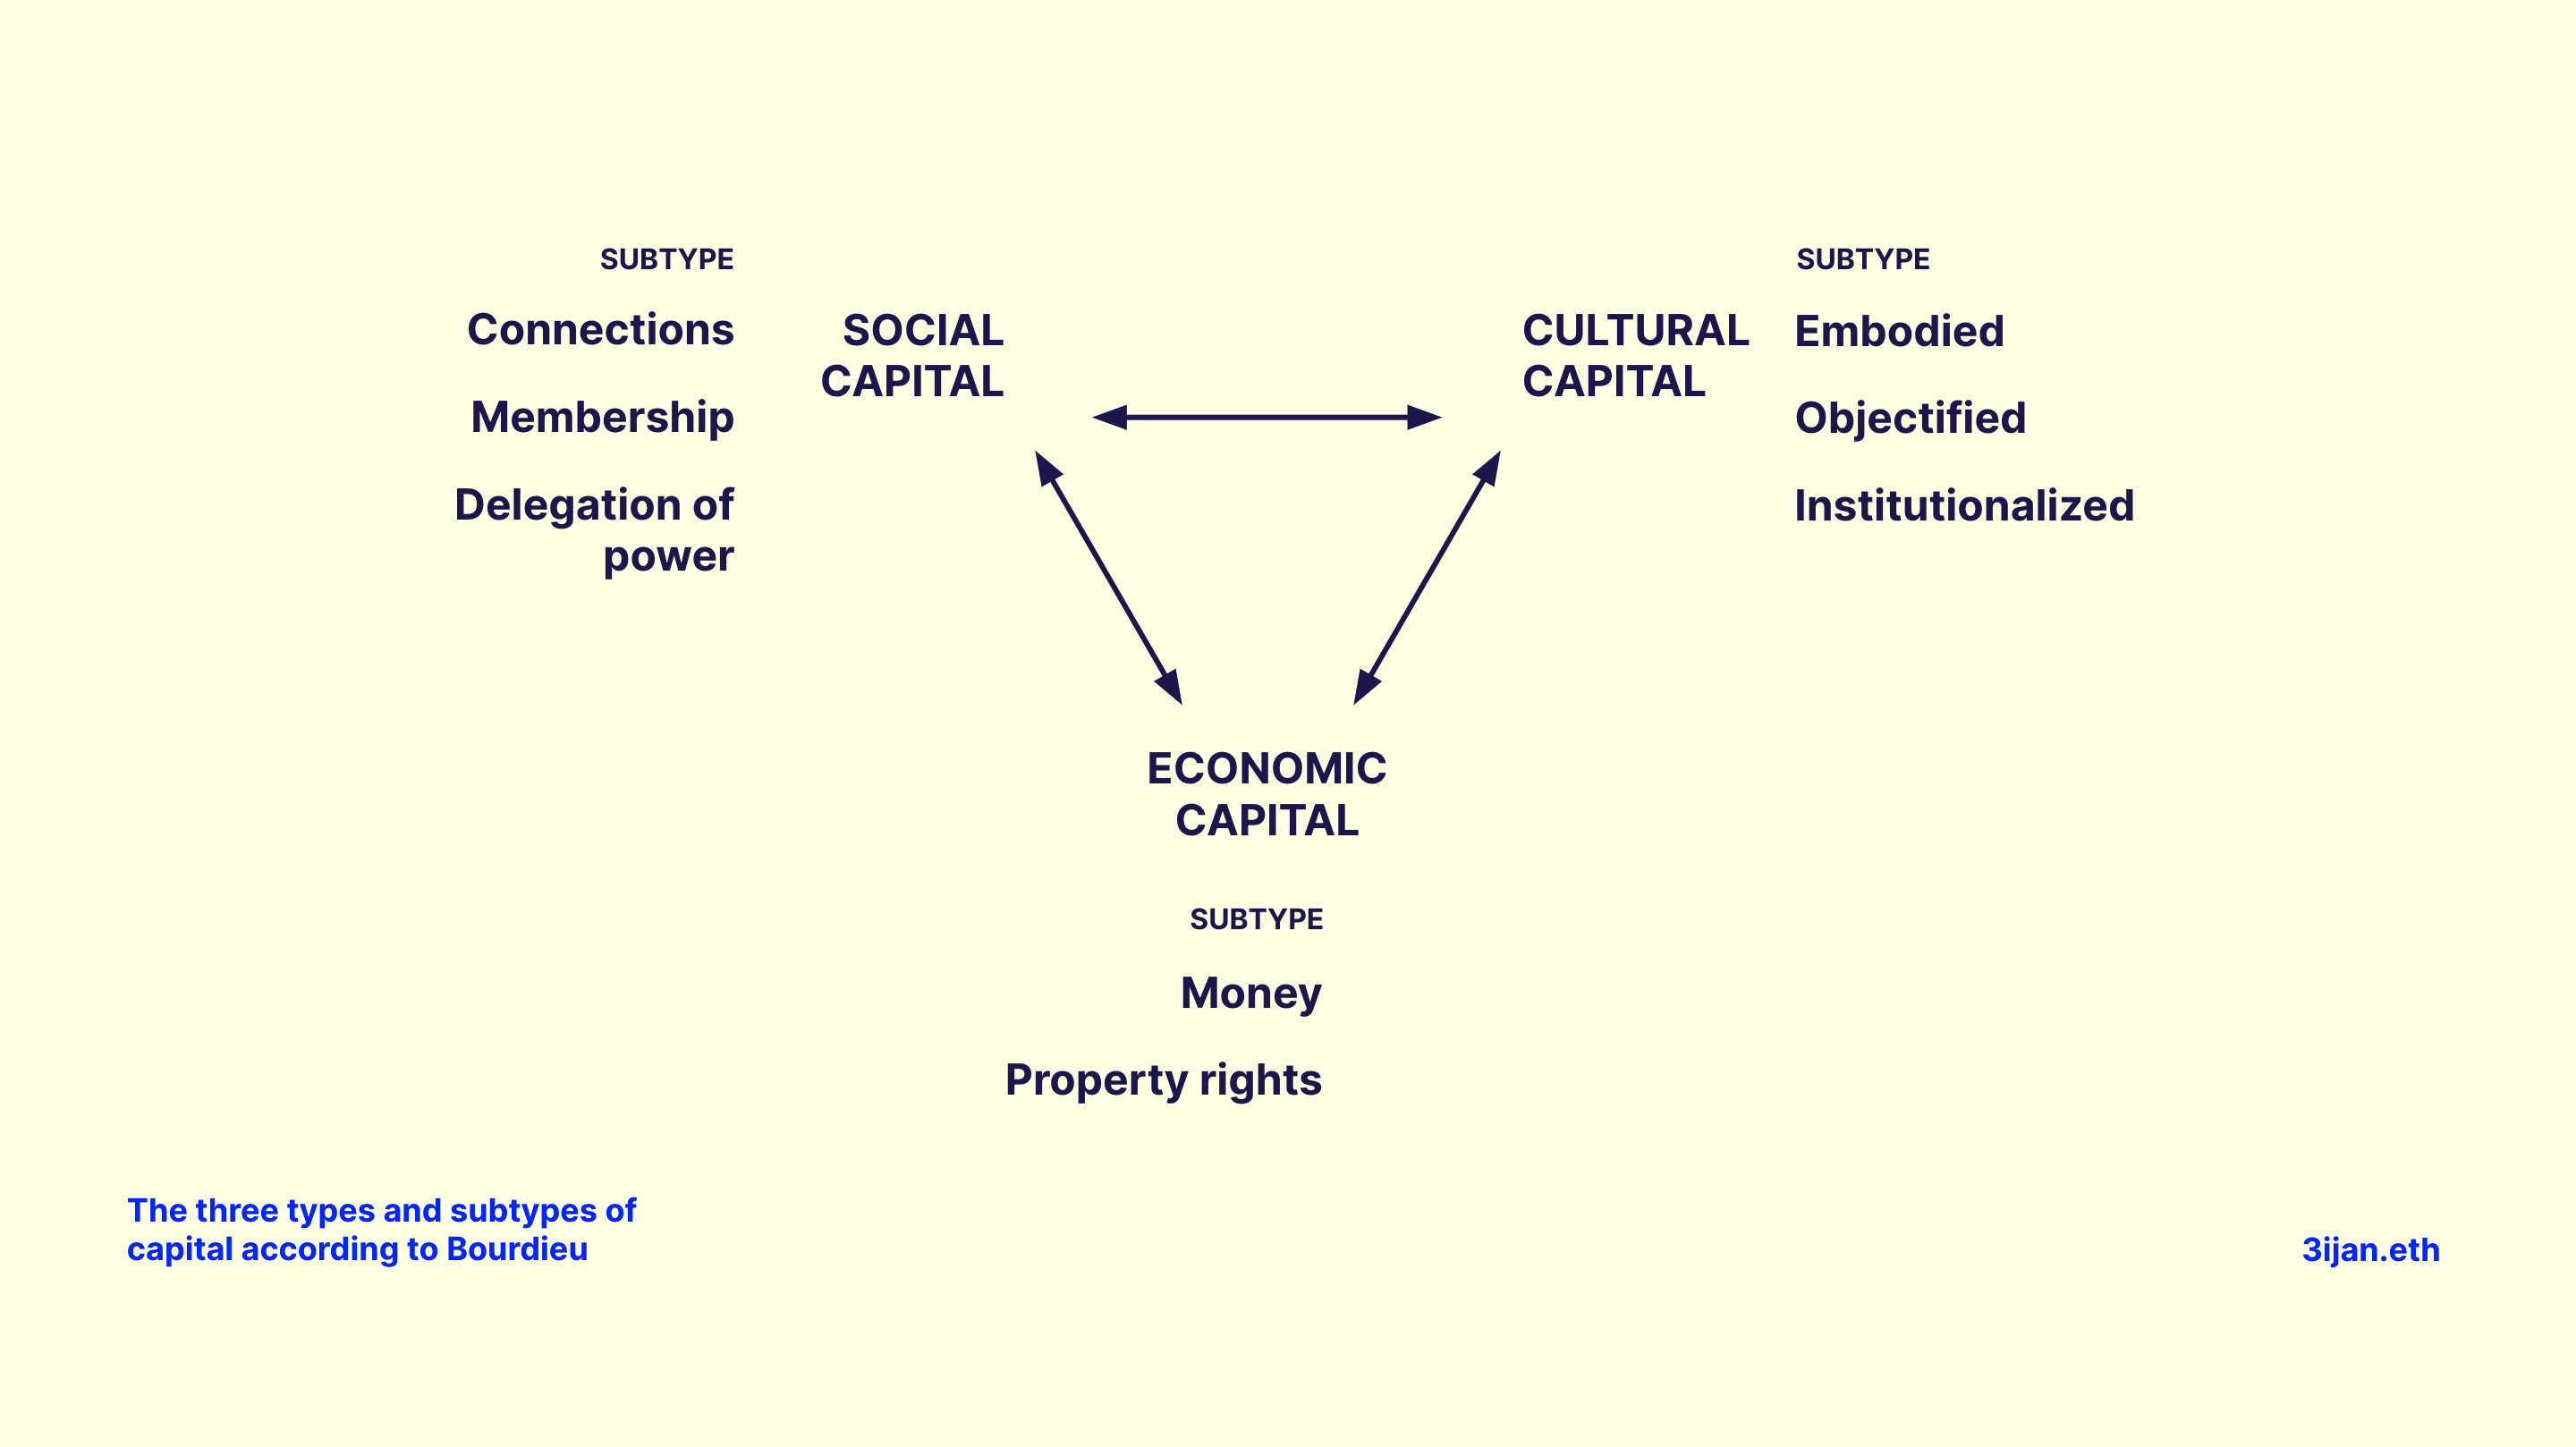 The three types and subtypes of capital according to Bourdieu